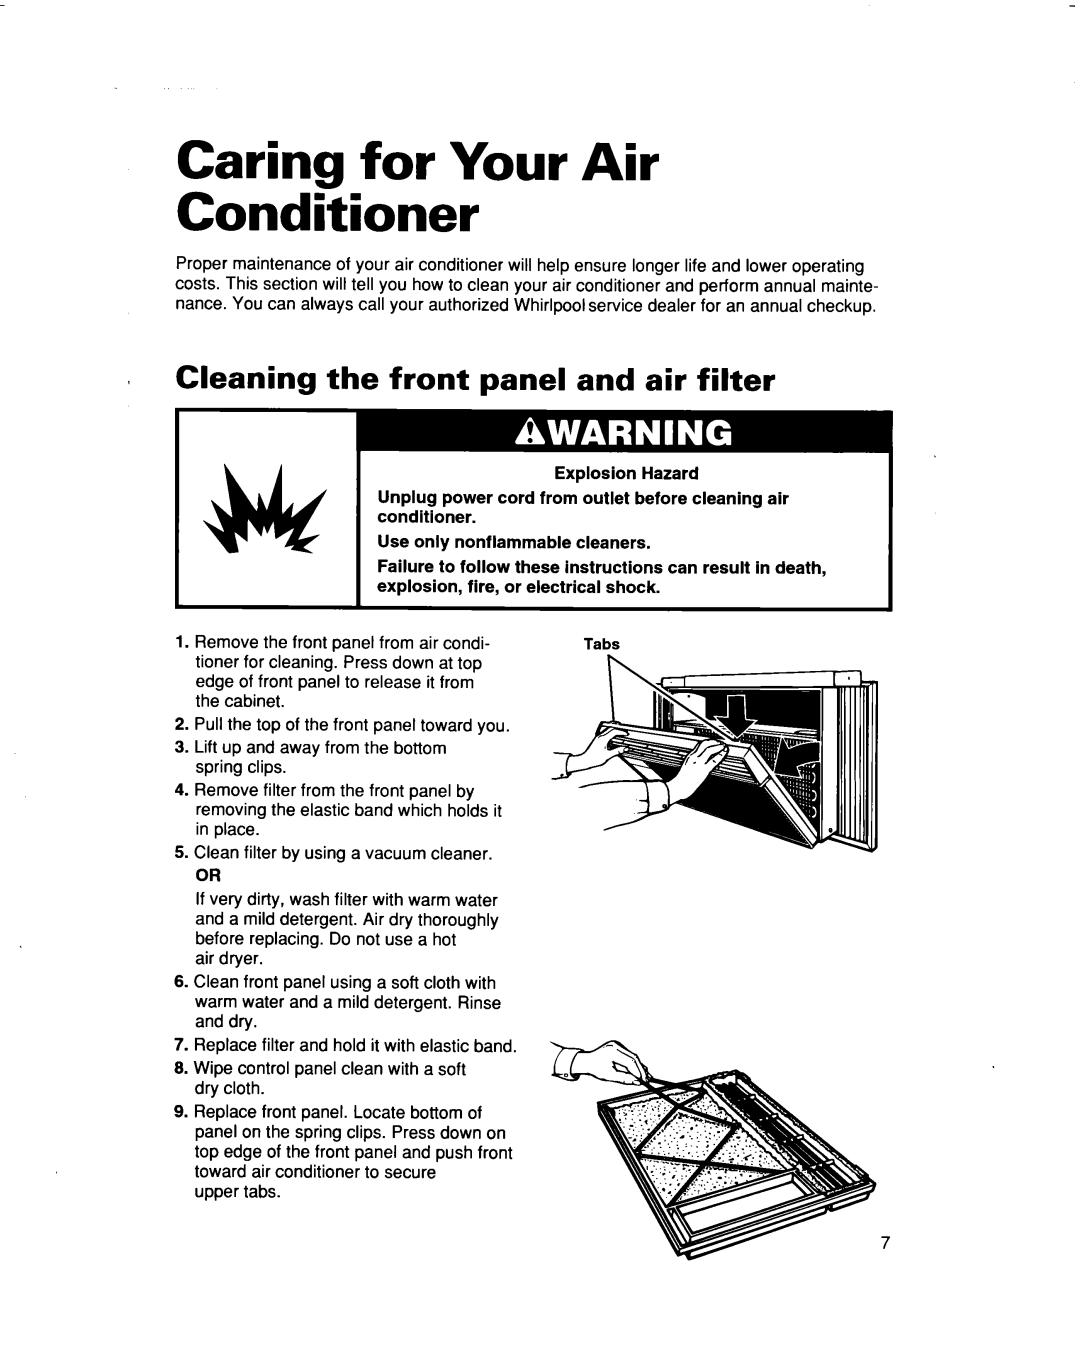 Whirlpool AR1200, AR1000 warranty Caring for Your Air Conditioner, Cleaning the front panel and air filter 